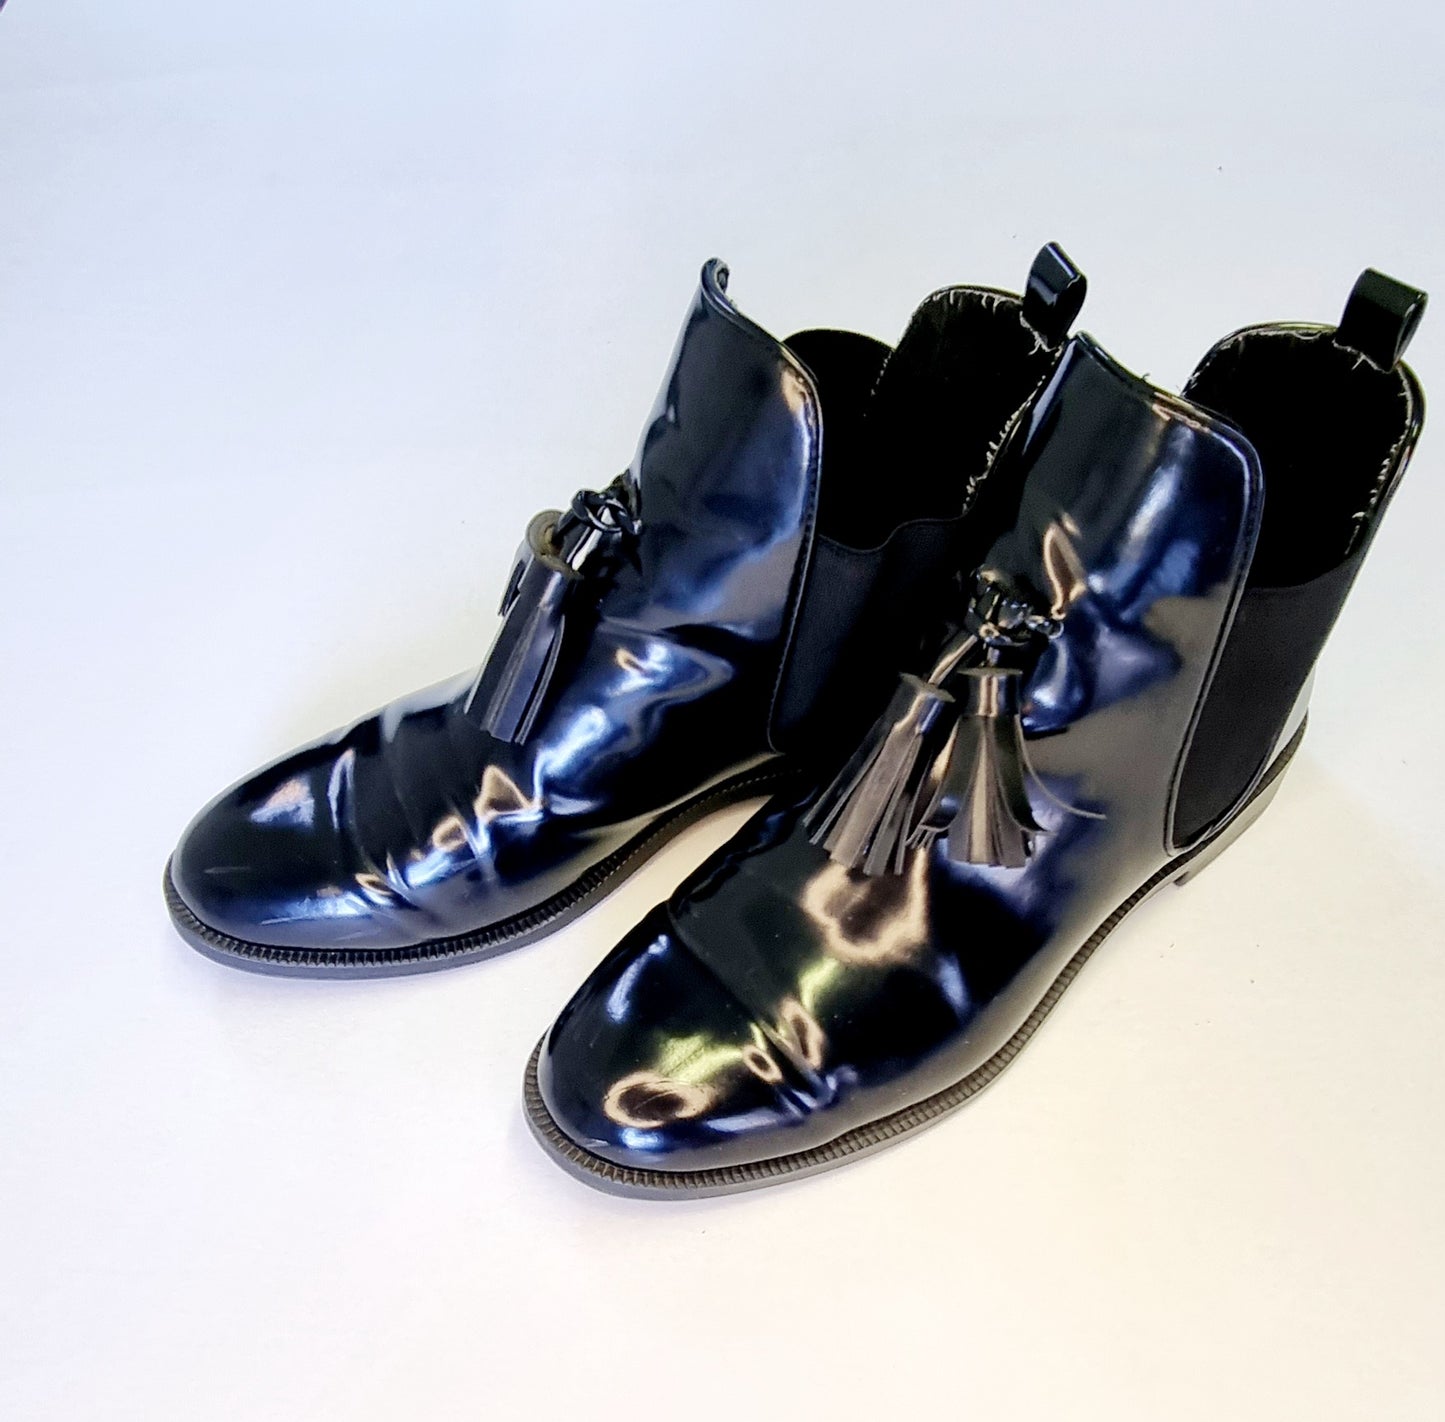 Zara Trafaluc - Black glossy patent leather slip on low heel Chelsea boots with front ties